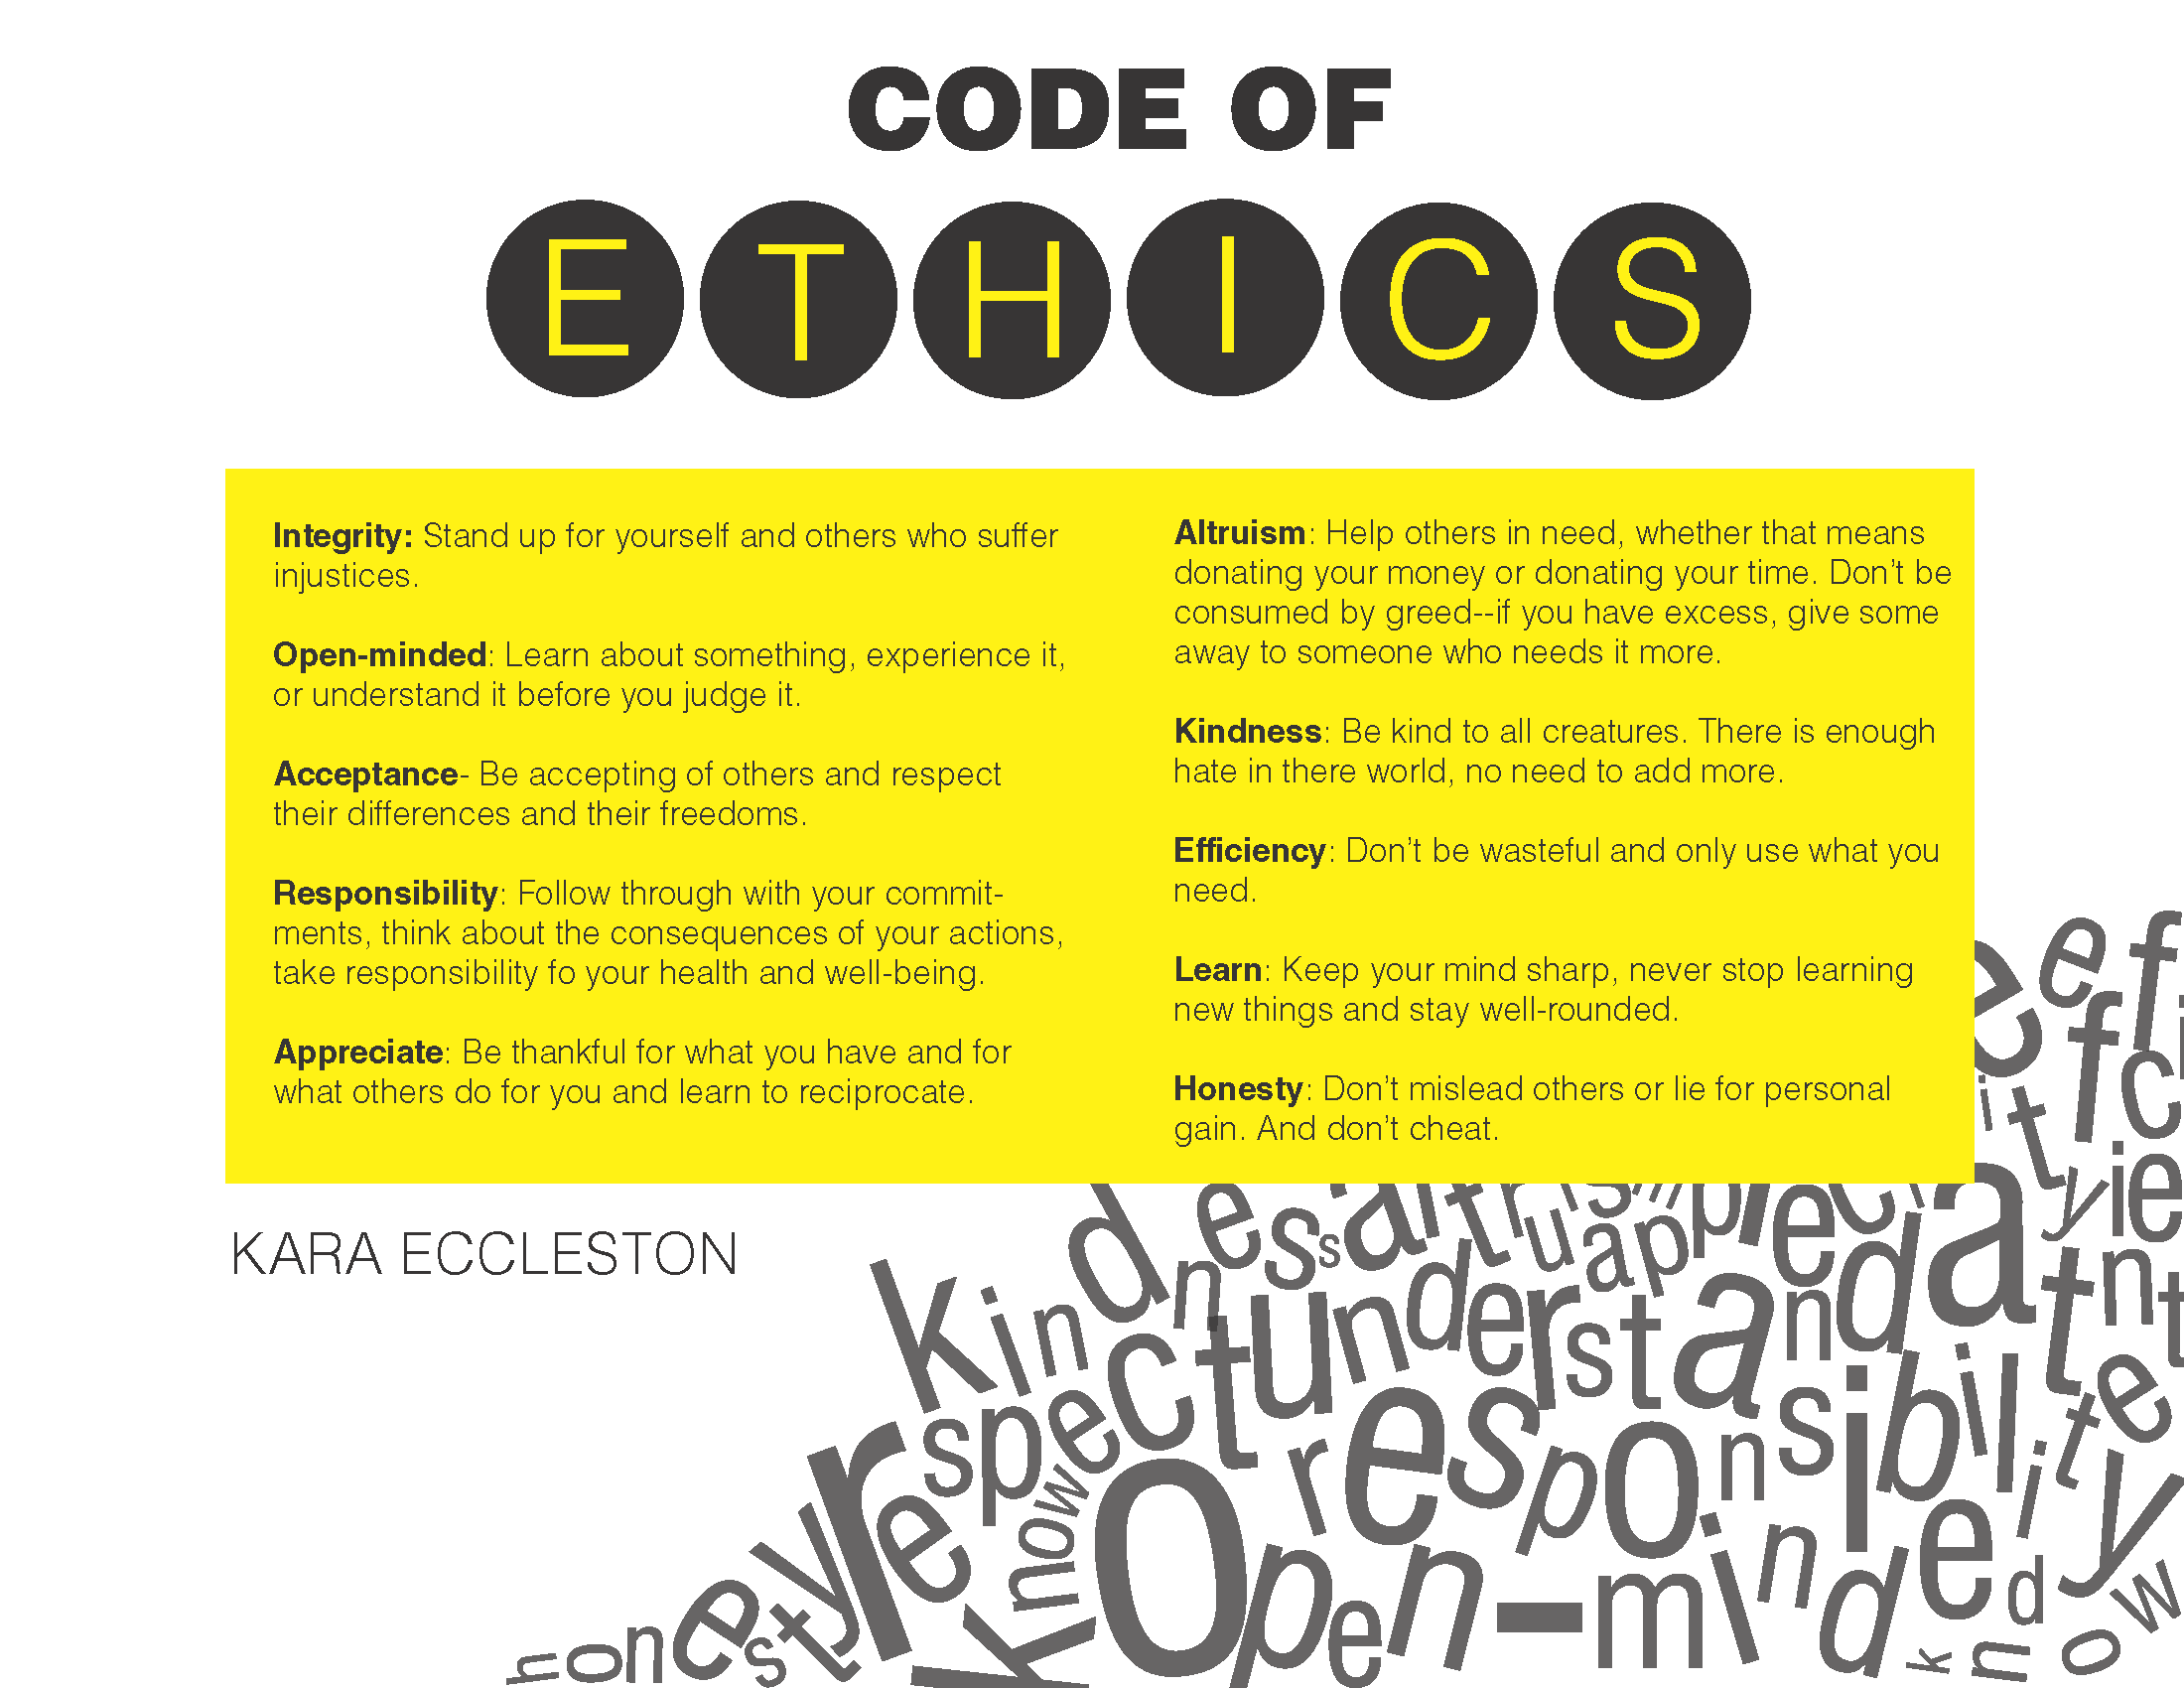 Personal code of ethics essay